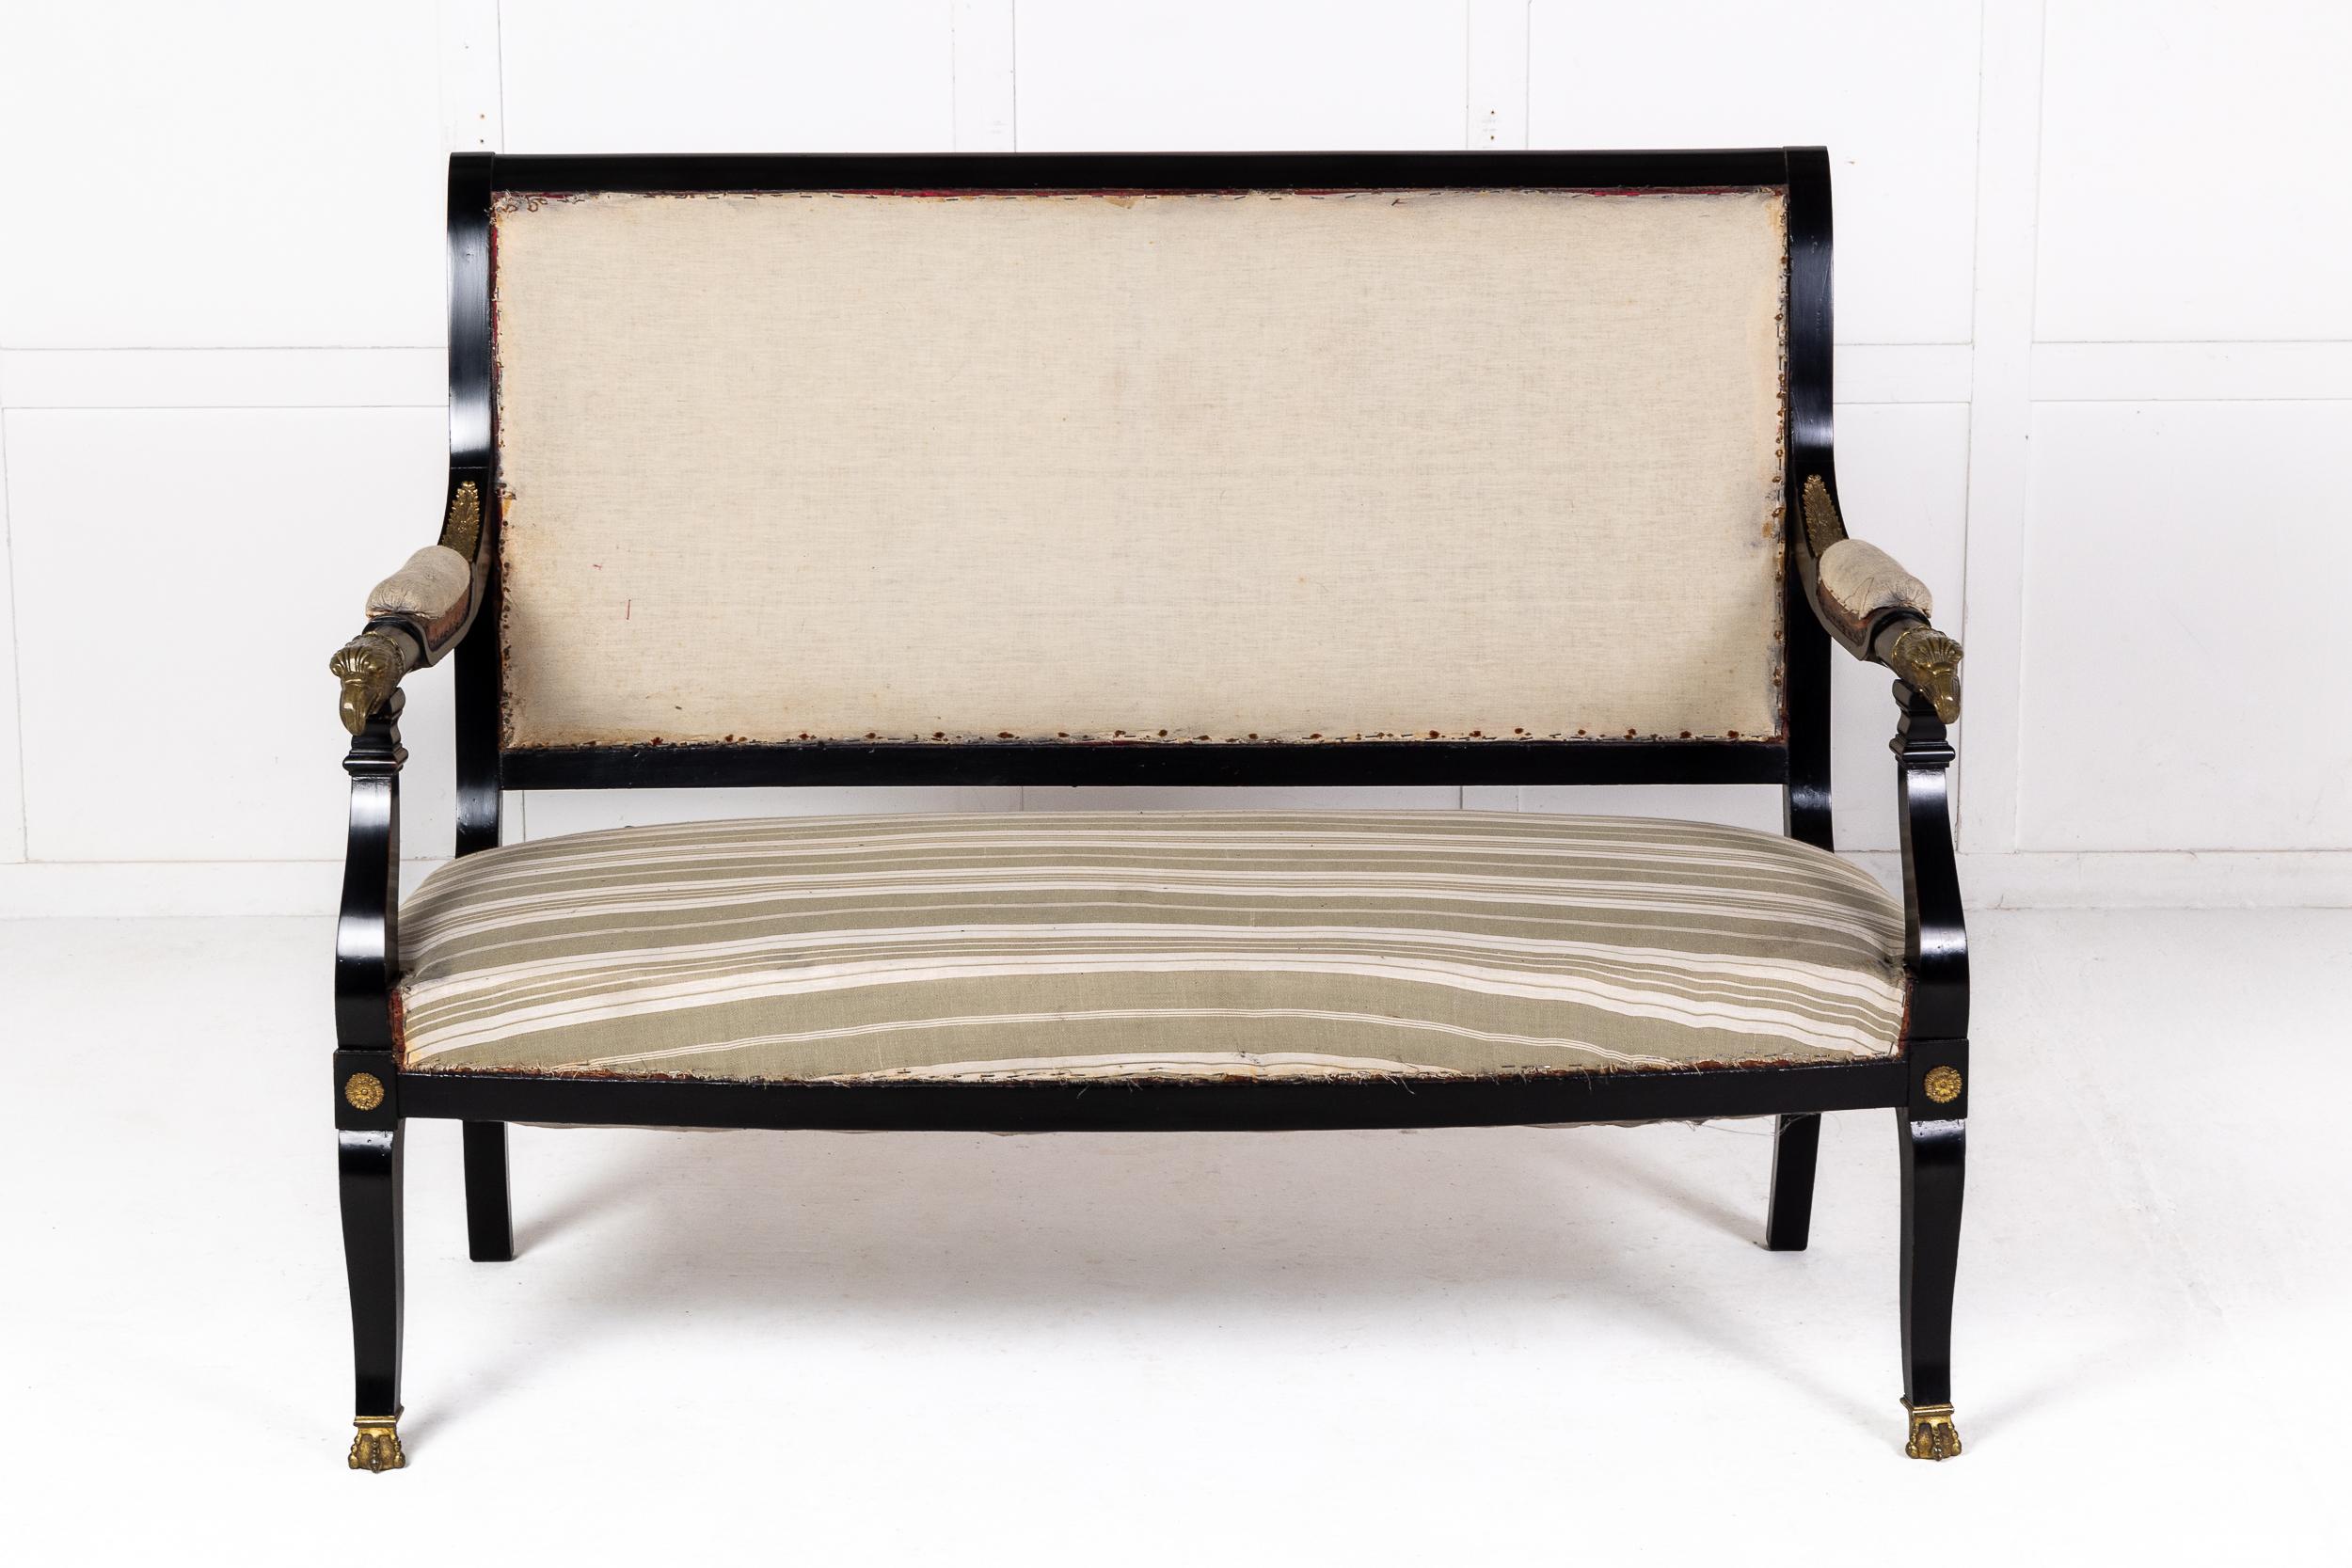 A French Empire Style Ebonised Sofa with Fine Eagle Head Mounts.

This fine sofa, in the early 19th century Empire style, was made in France c.1910. The ebonised finish contrasts beautifully with the fine ormolu mounts, including acanthus leaf